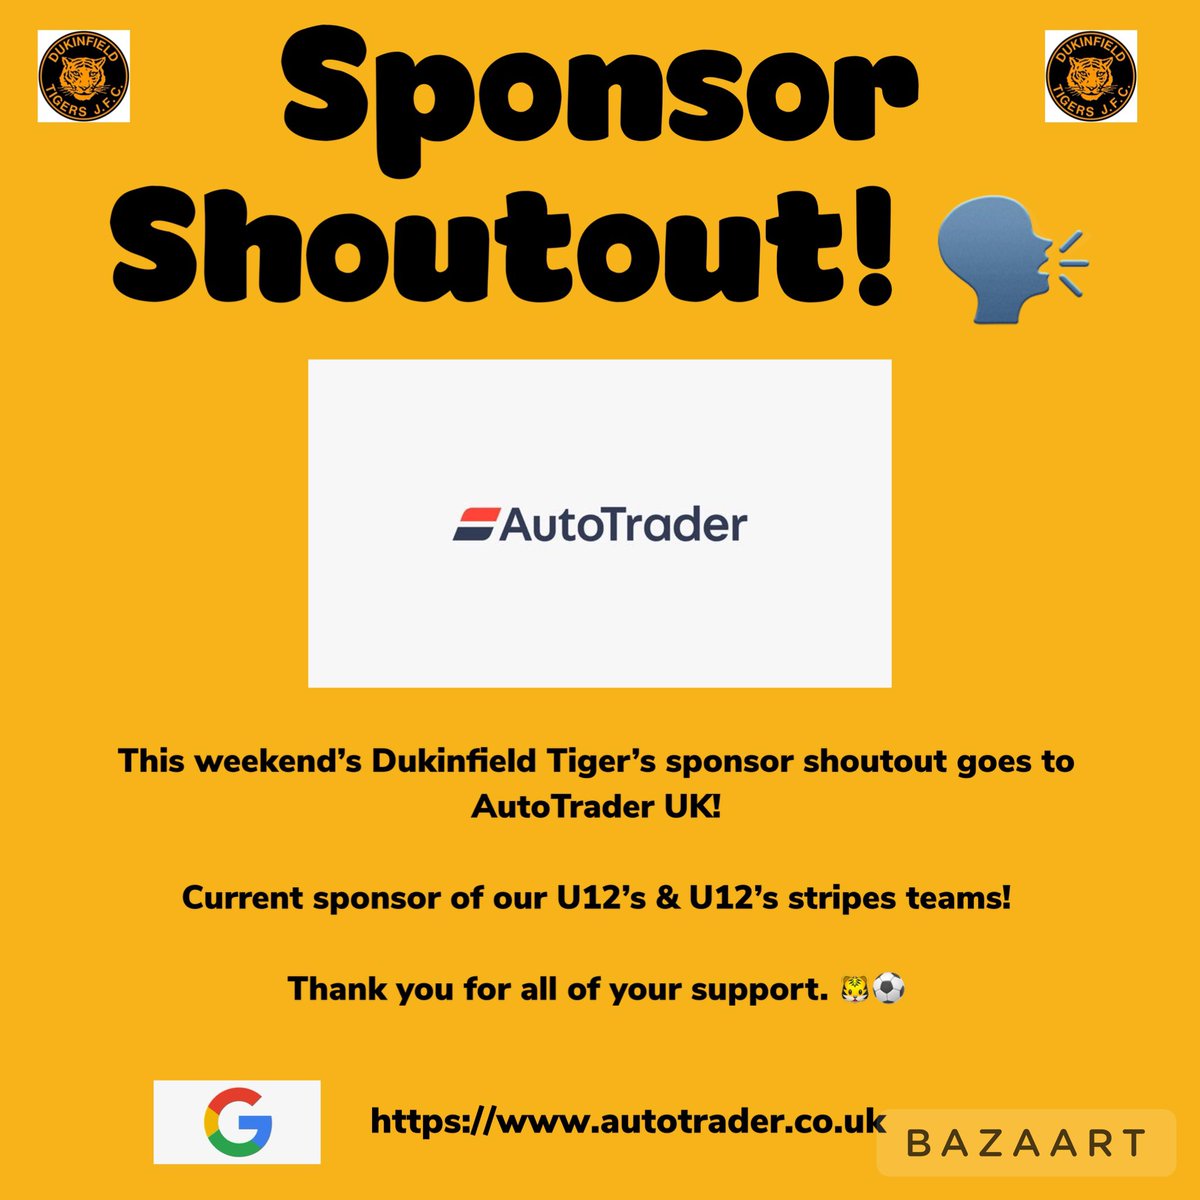 This weekend’s sponsor shoutout goes to AutoTrader UK 🗣️ Thank you for all of your support! 🐯⚽️